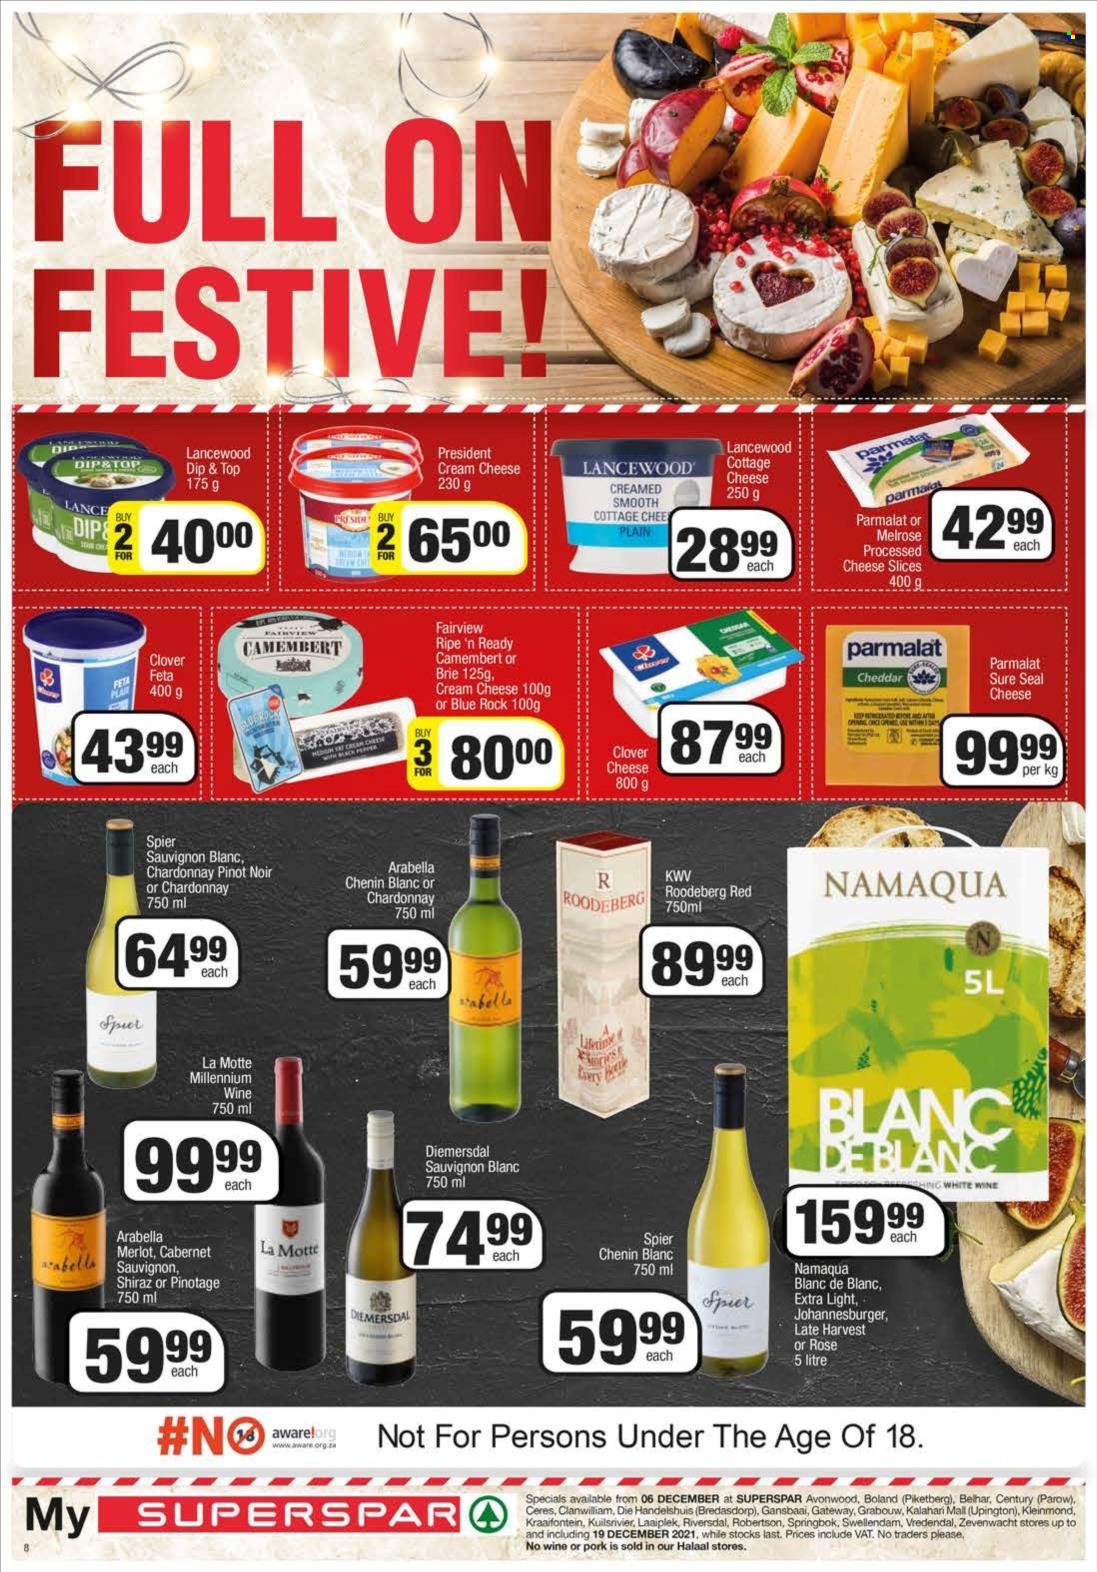 SPAR catalogue  - 06/12/2021 - 19/12/2021 - Sales products - camembert, cottage cheese, cream cheese, sliced cheese, cheddar, brie cheese, cheese, Lancewood, Président, feta cheese, Melrose, Clover, Parmalat, Cabernet Sauvignon, red wine, white wine, Chardonnay, Merlot, Pinot Noir, KWV, Chenin Blanc, Shiraz, Diemersdal, Sauvignon Blanc, rosé wine, Sure. Page 8.